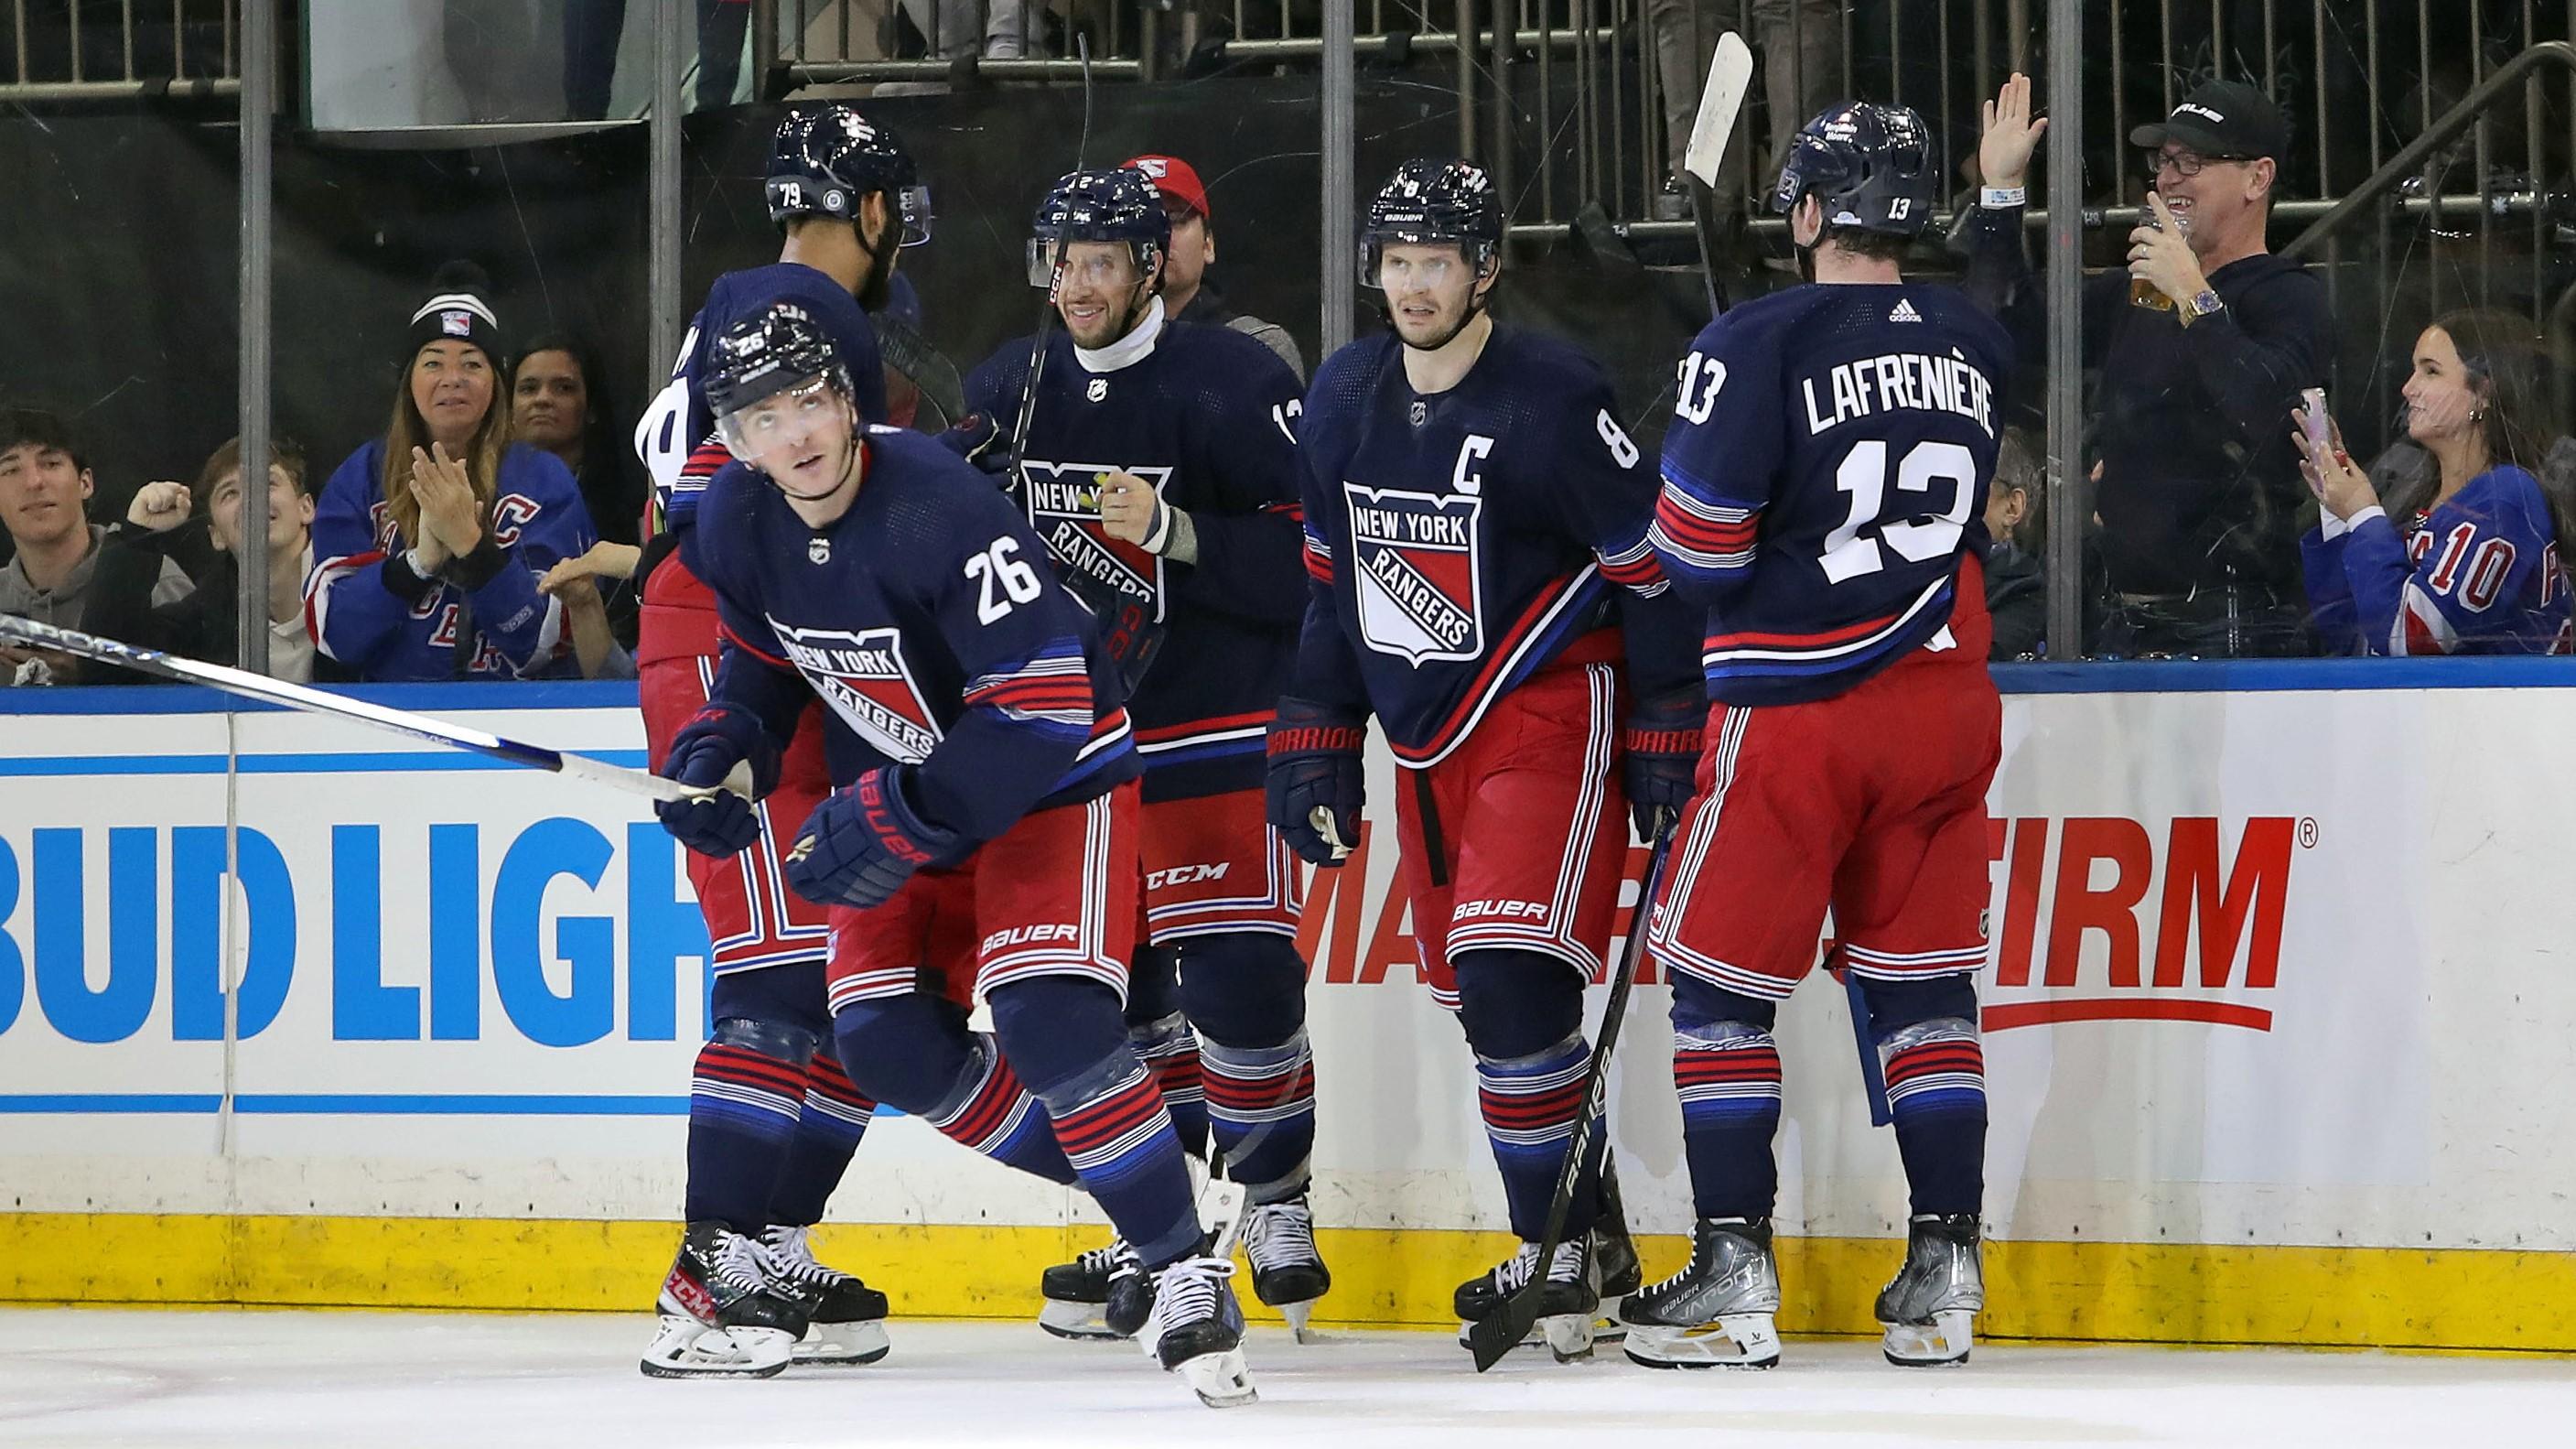 Dec 10, 2023; New York, New York, USA; New York Rangers left wing Jimmy Vesey (26) celebrates his goal with center Nick Bonino (12), forward Alexis Lafreniere (13), defenseman K'Andre Miller (79) and defenseman Jacob Trouba (8) during the second period against the Los Angeles Kings at Madison Square Garden. Mandatory Credit: Danny Wild-USA TODAY Sports / © Danny Wild-USA TODAY Sports